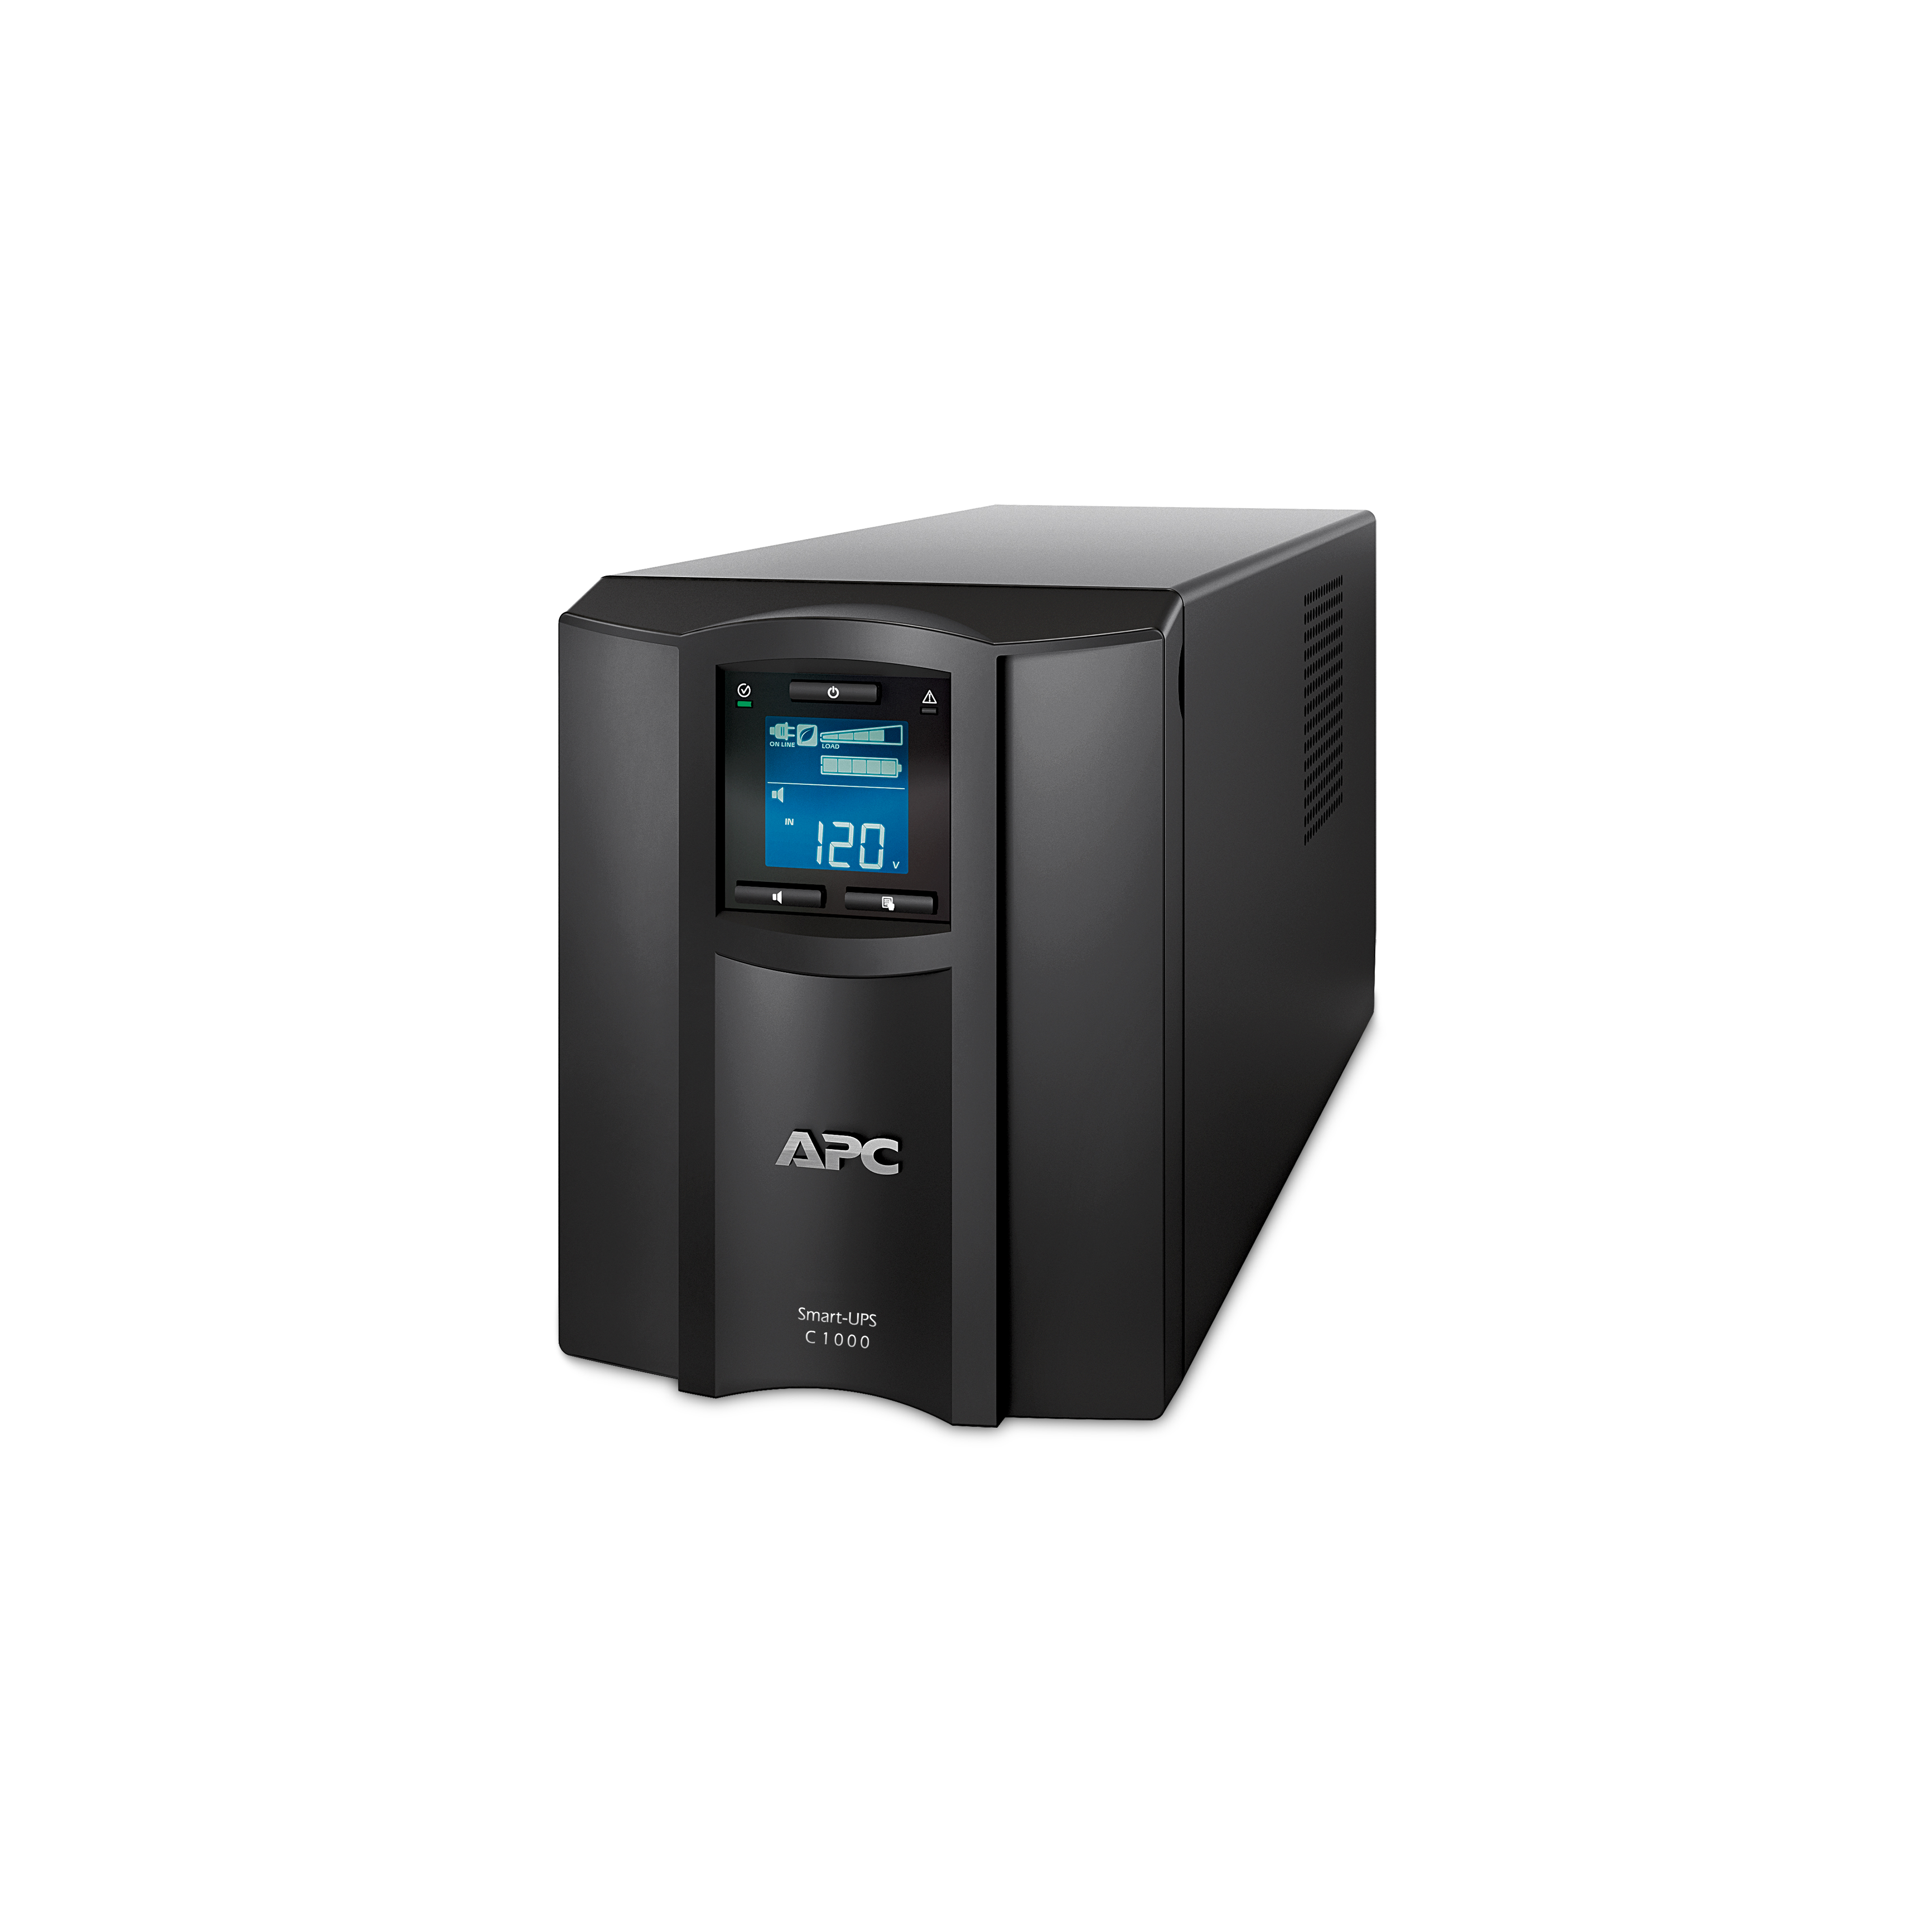 APC Smart-UPS C, Line Interactive, 1000VA, Tower, 120V, 8x NEMA 5-15R outlets, SmartConnect port, USB and Serial communication, AVR, Graphic LCD